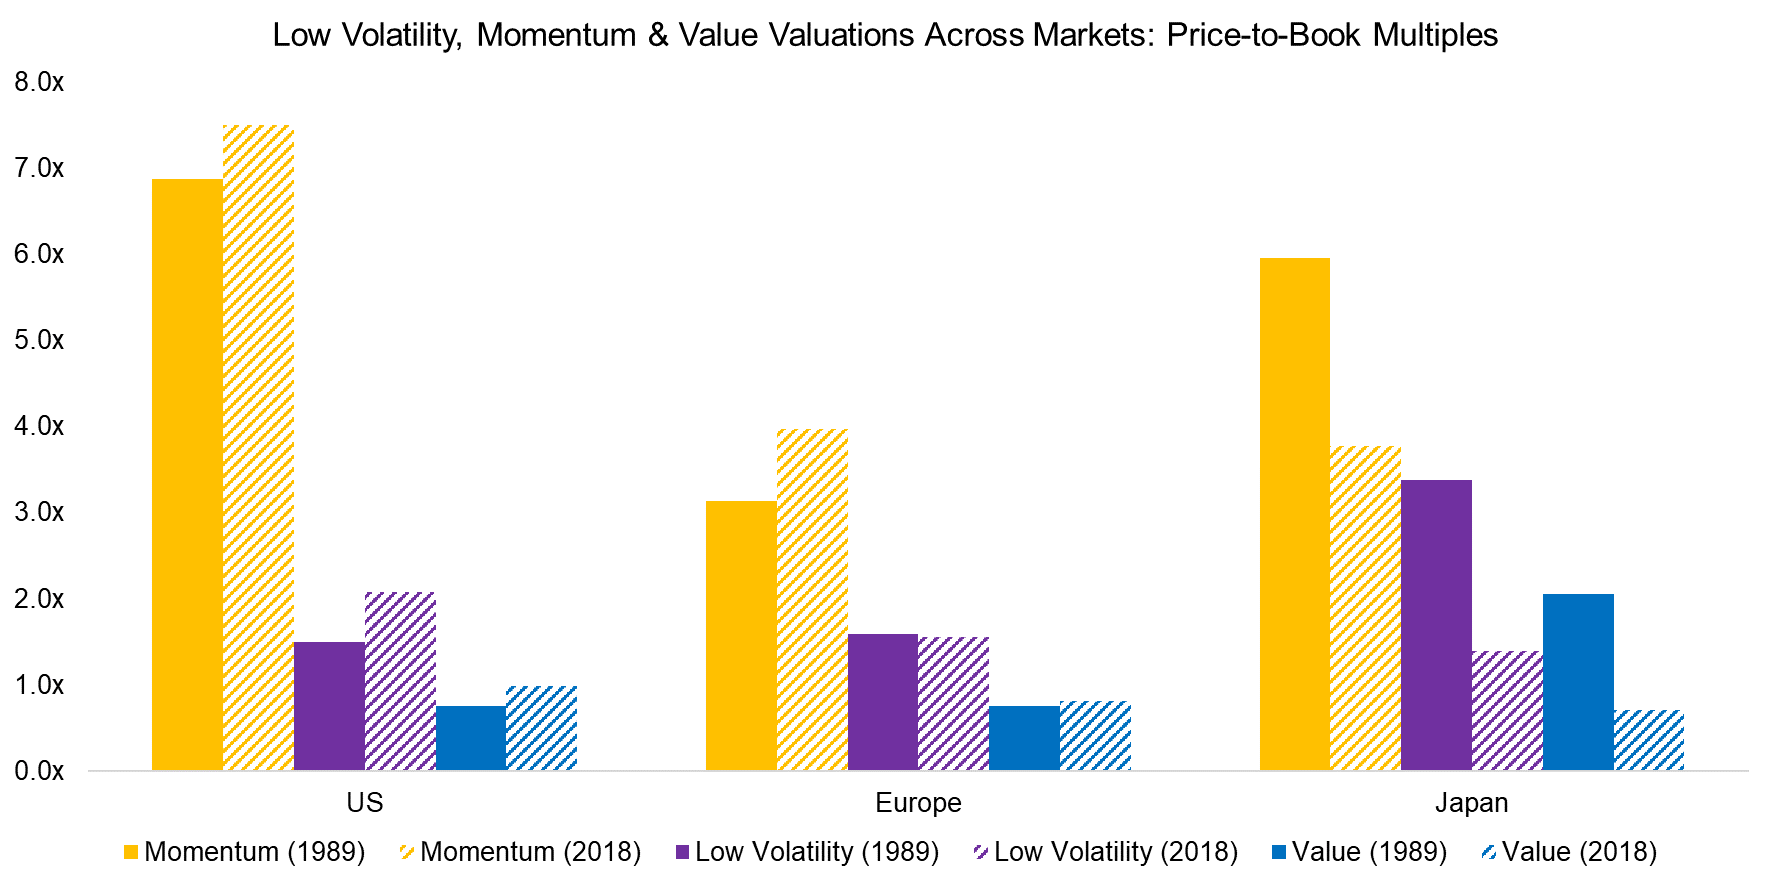 Low Volatility, Momentum & Value Valuations Across Markets Price-to-Book Multiples